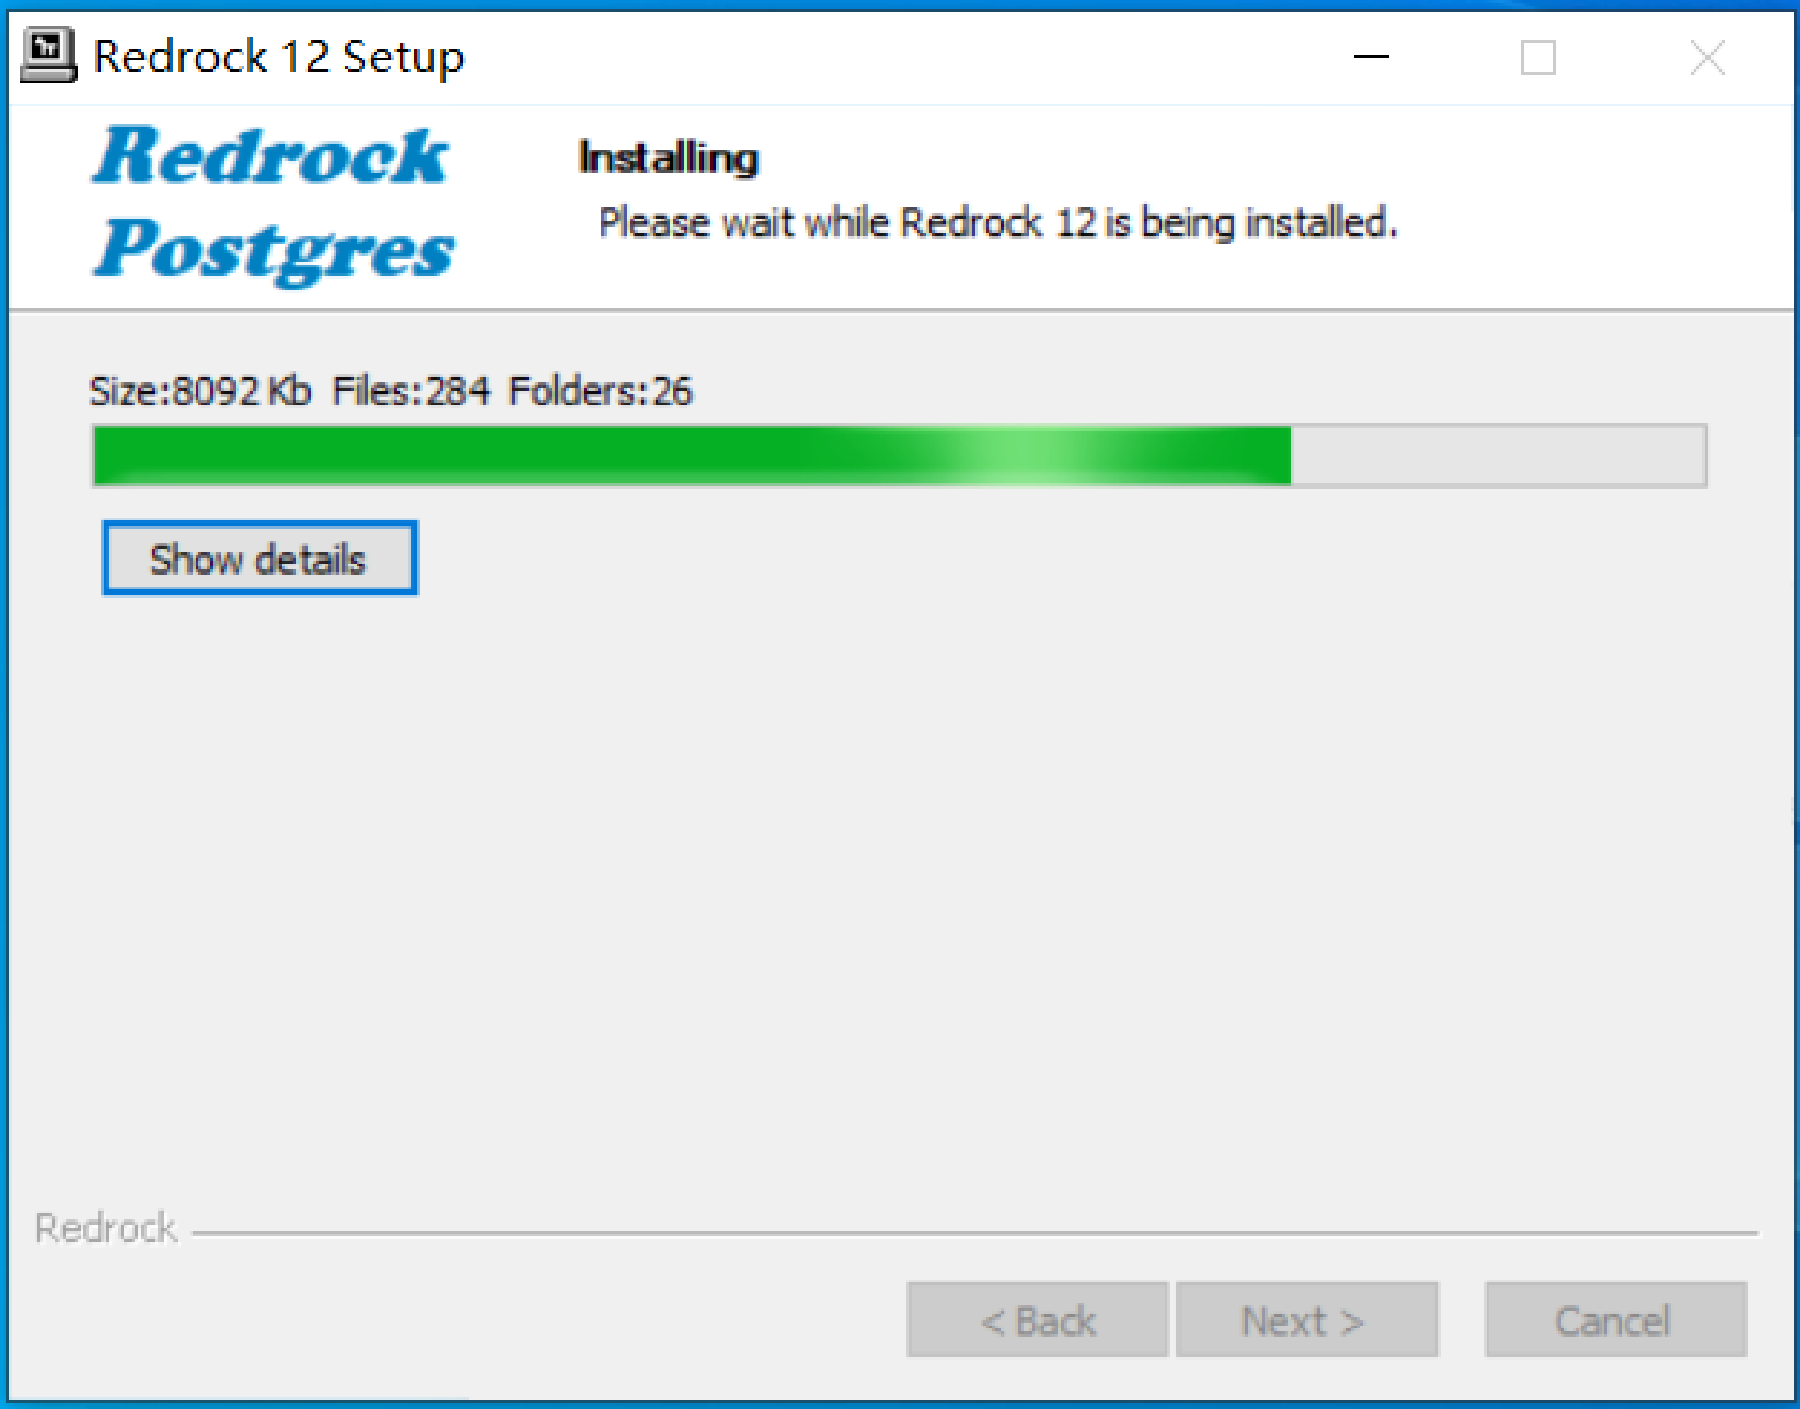 Fig. 7: The Installing dialog